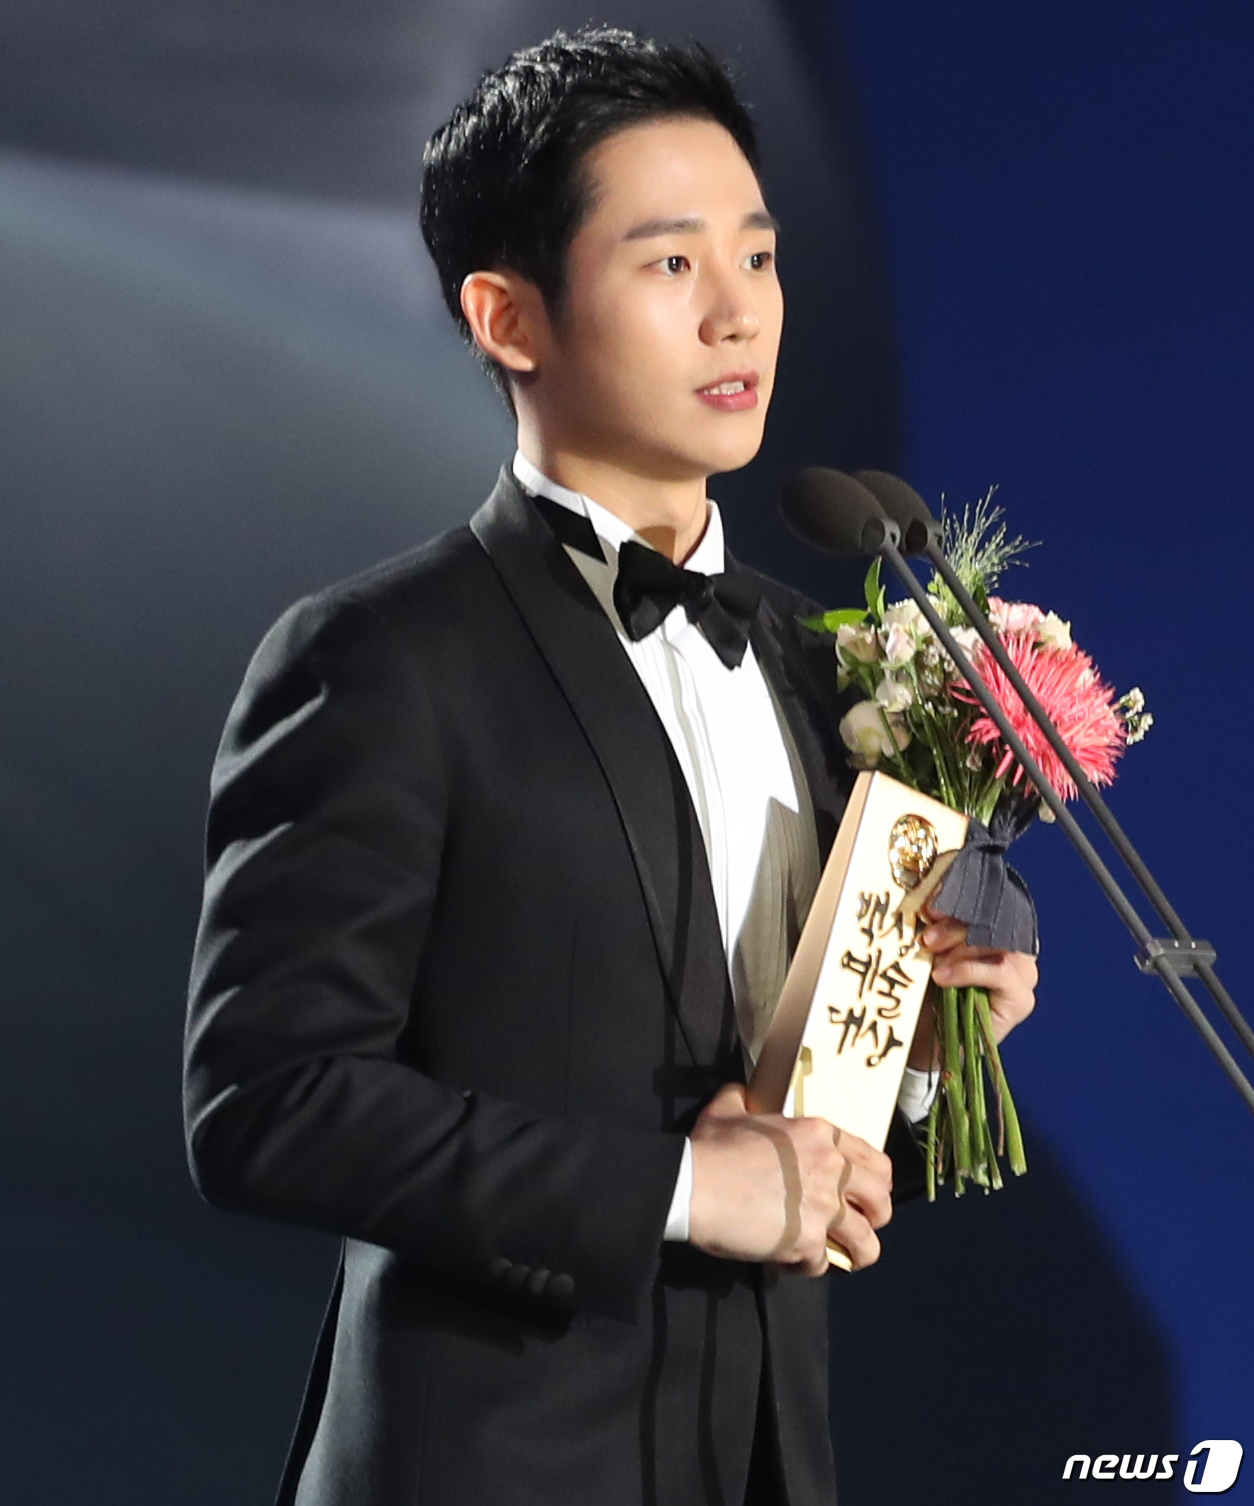 Seoul:) = Actor Jung Hae In recently left his first heartbreak after the center controversy erupted at the Baeksang Arts Awards.Jung Hae In posted on his official Fan Cafe on the 9th, How are you doing? I have not been able to say anything to you since I have been greeting you for a long time.He said, First of all, I am back from the last filming of Drama Beauty Sister who buys rice well.I am writing to you because I am so blank in my mind, he said. This work seems to remain for me as a work I will never forget. Jung Hae In said he hopes to watch a lot until the end of this weeks broadcast and the last broadcast next week. And thanks to you, I am so grateful and grateful for receiving the award.I wanted to say this. Finally, Jung Hae In said, I am very grateful for your support and love for me.As I said in my testimony, I will walk silently and calmly on the way I am given to me.  Fans who love me, I respect you and love .Meanwhile, Jung Hae In was caught up in the center controversy after the 2018 Baeksang Arts Awards held on the 3rd.The controversy over the center was raised because the winners were located in the place where they took the commemorative photo.Viewers pointed out that Jung Hae In, a popular award winner, rather than a best acting award winner, took the center, which led to a major controversy.It is specialized in Jung Hae In Fan Cafe writing.Hello, everyone. Its Haein.How are you? Ive been saying hello to you for a long time, so I dont know what to say.First of all, I am back from the last filming of Drama Beauty Sister who buys rice well.I am writing to you after being so blank in my mind.I think this work will remain to me as a work that I will never forget.I usually feel good when I finish my work, but on the other hand I feel so good. It is so different from the feelings I have felt so far.Now, this week, 13 times and 14 times will be broadcast, and next week, Drama will end.I will also be with you as a viewer, so I would like to ask you to watch a lot to the end!And thanks to you, I am so grateful and grateful for my over-respected award. I really wanted to say this.I am grateful for your support and love for me, and I will walk silently and calmly on the way I am given, as I said in my acceptance speech.Fans who love me, I respect you and love you.